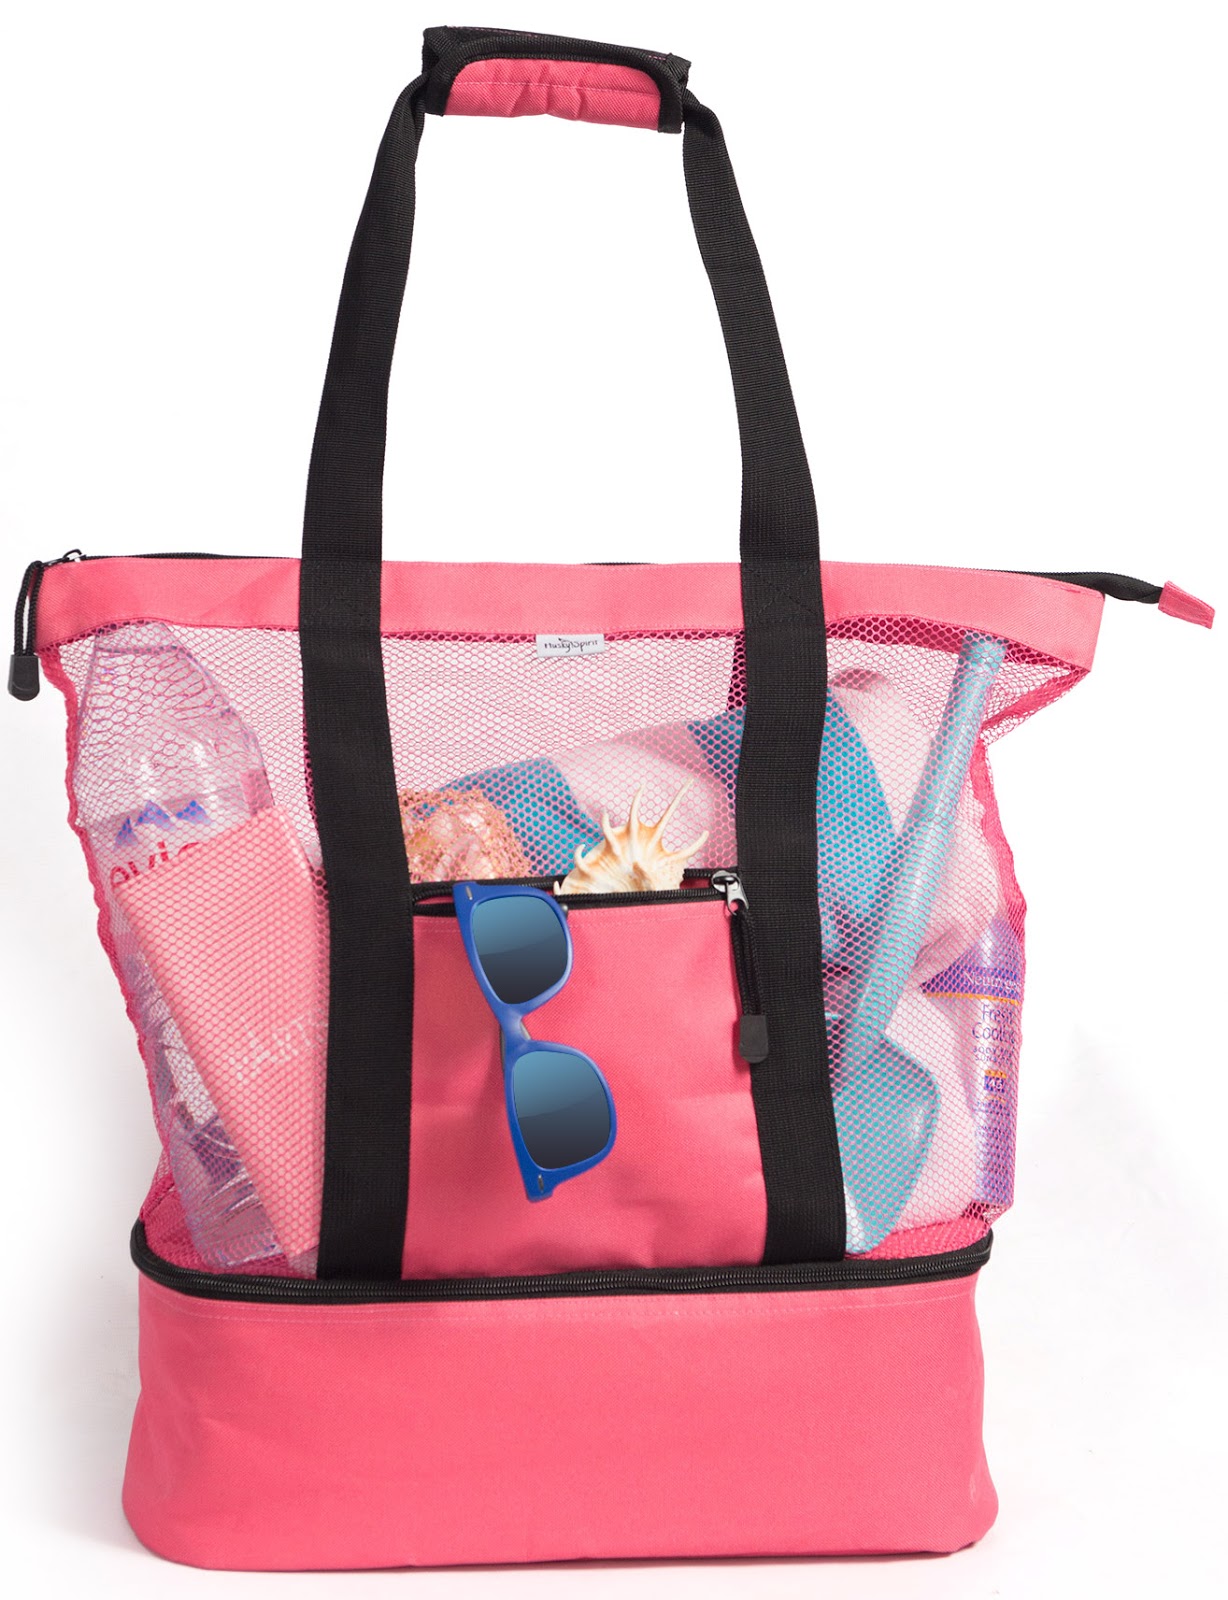 Deon Reviews 4U: Pink Mesh Beach Tote Bag with Cooler Compartment